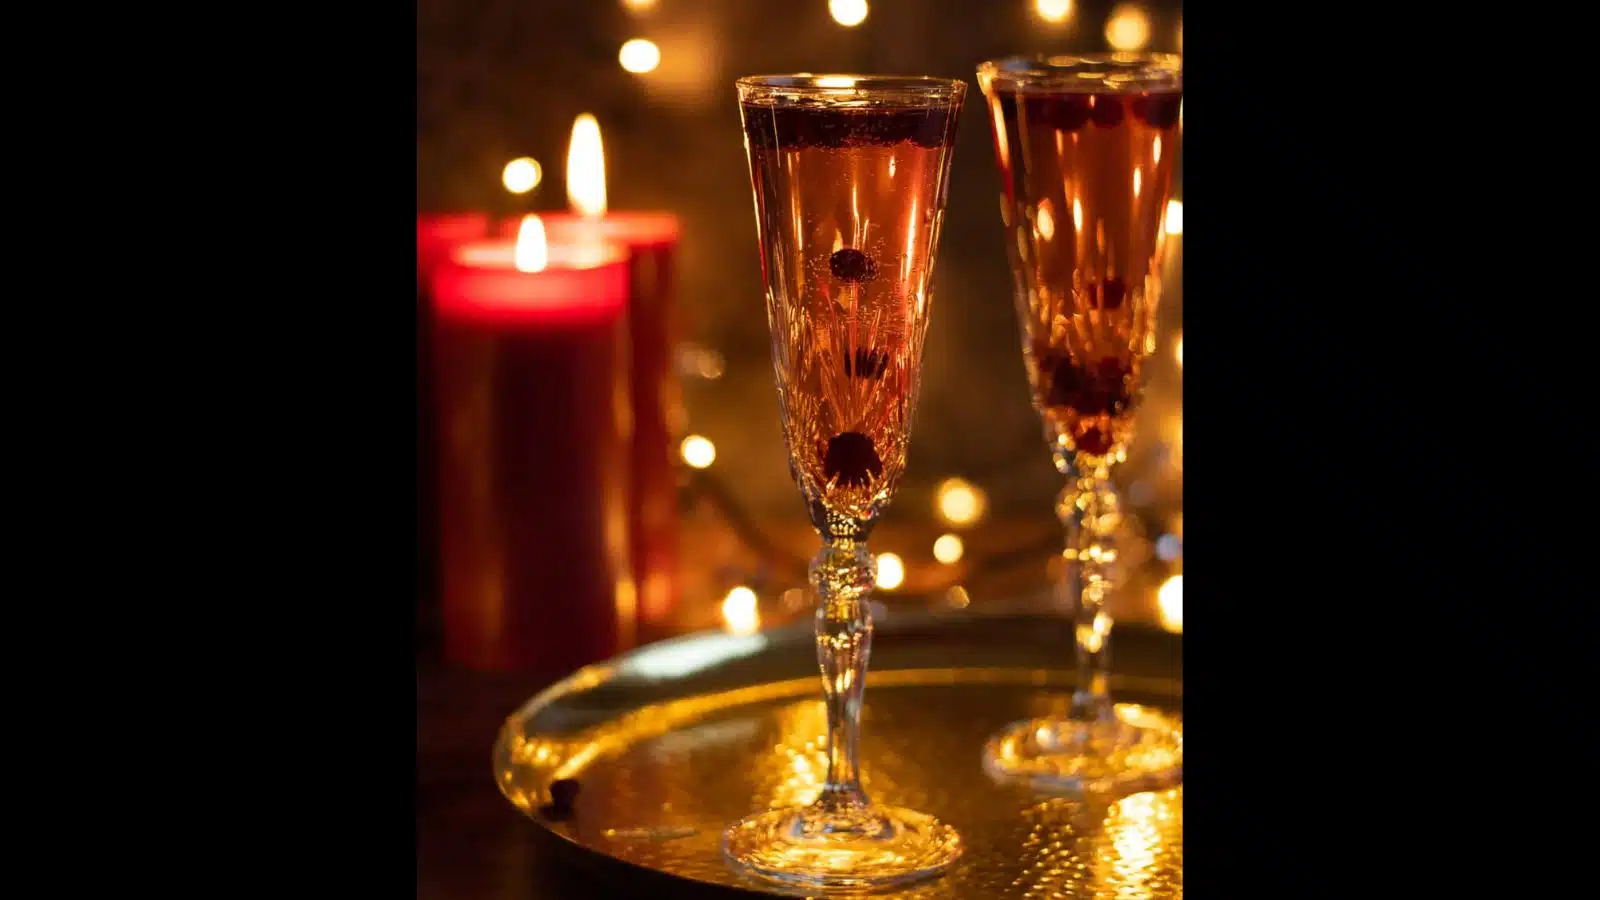 Two champagne flutes on a metal tray with champagne and cranberries. There are candles to the side